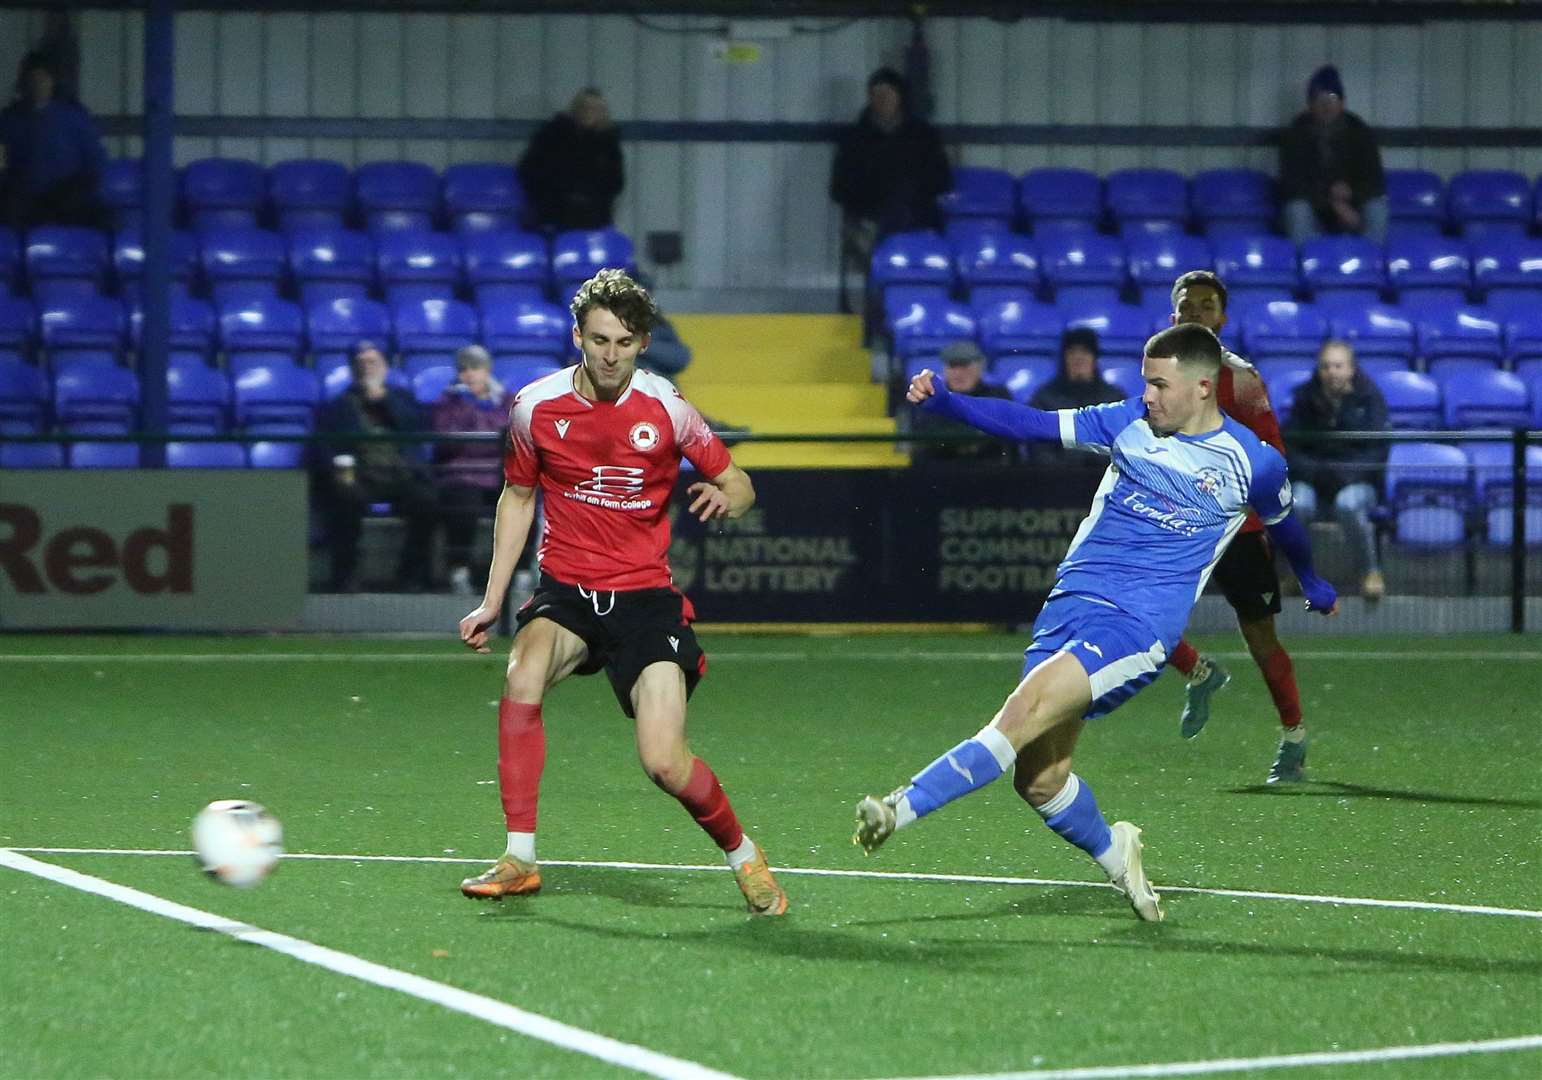 Jack Wood scores a goal against Eastbourne Borough. He's agreed to remain for the rest of the season on loan from Southend Picture: David Couldridge